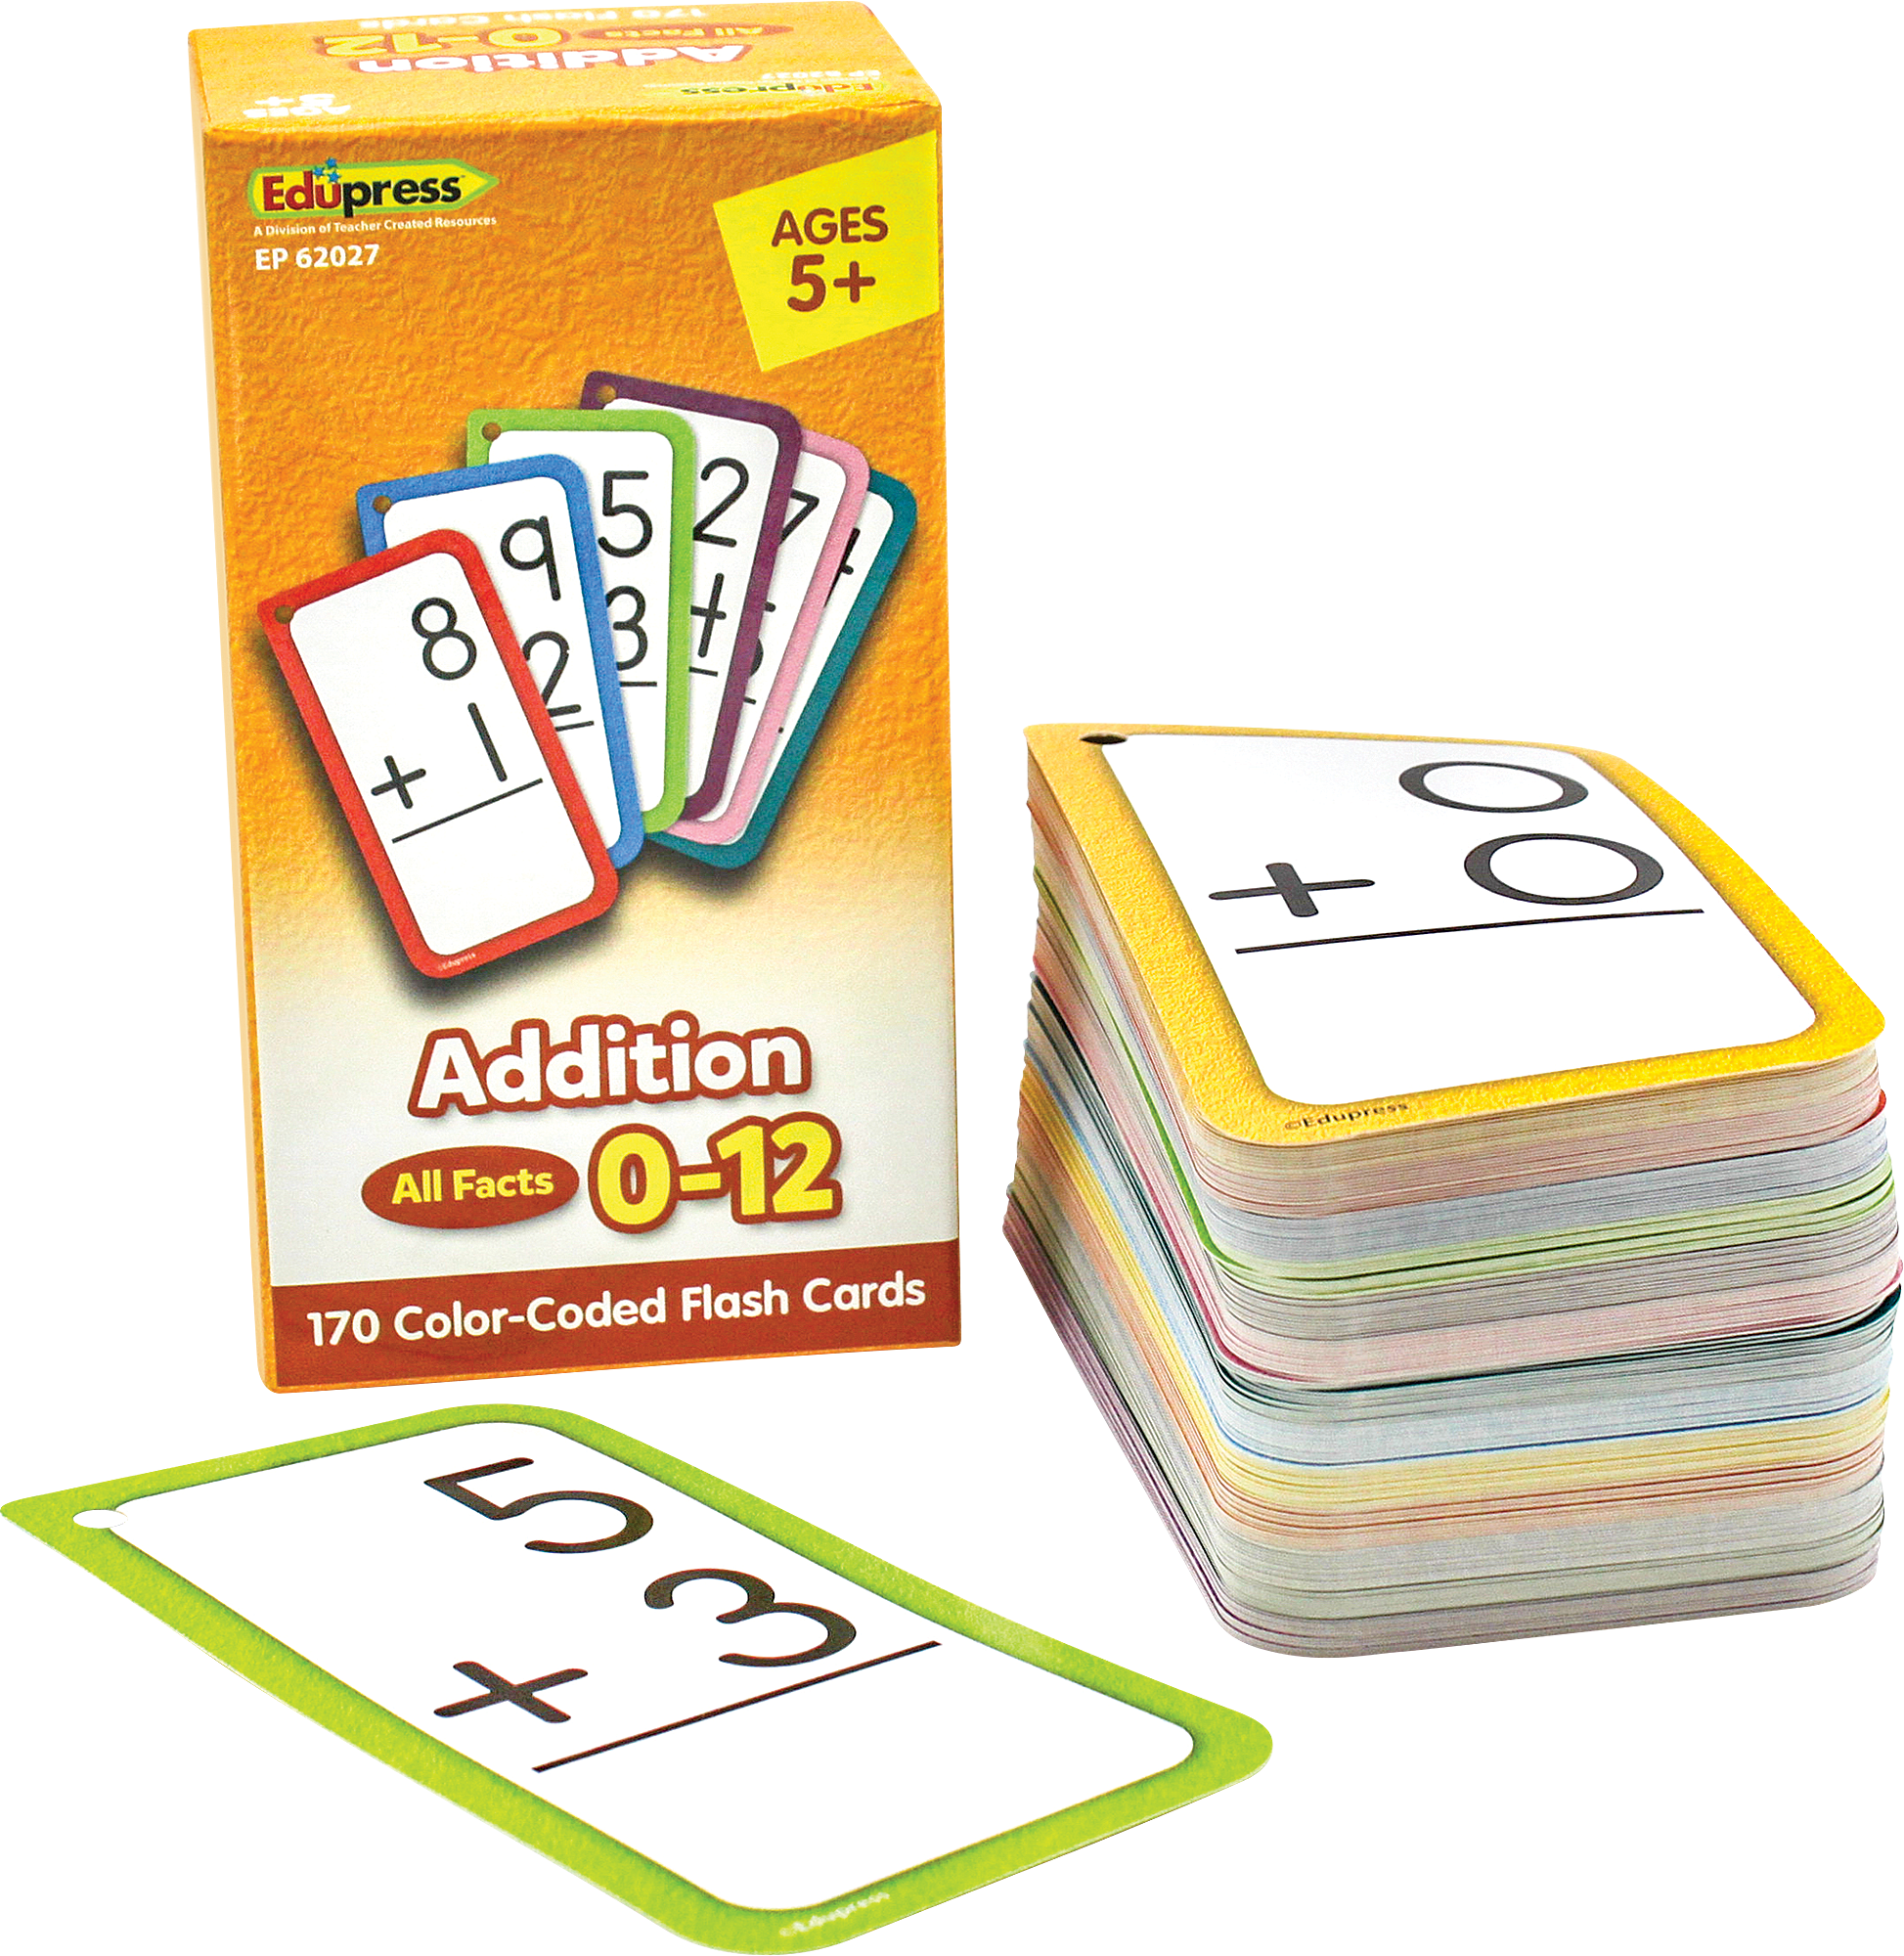 Addition Flash Cards - All Facts 0â€“12